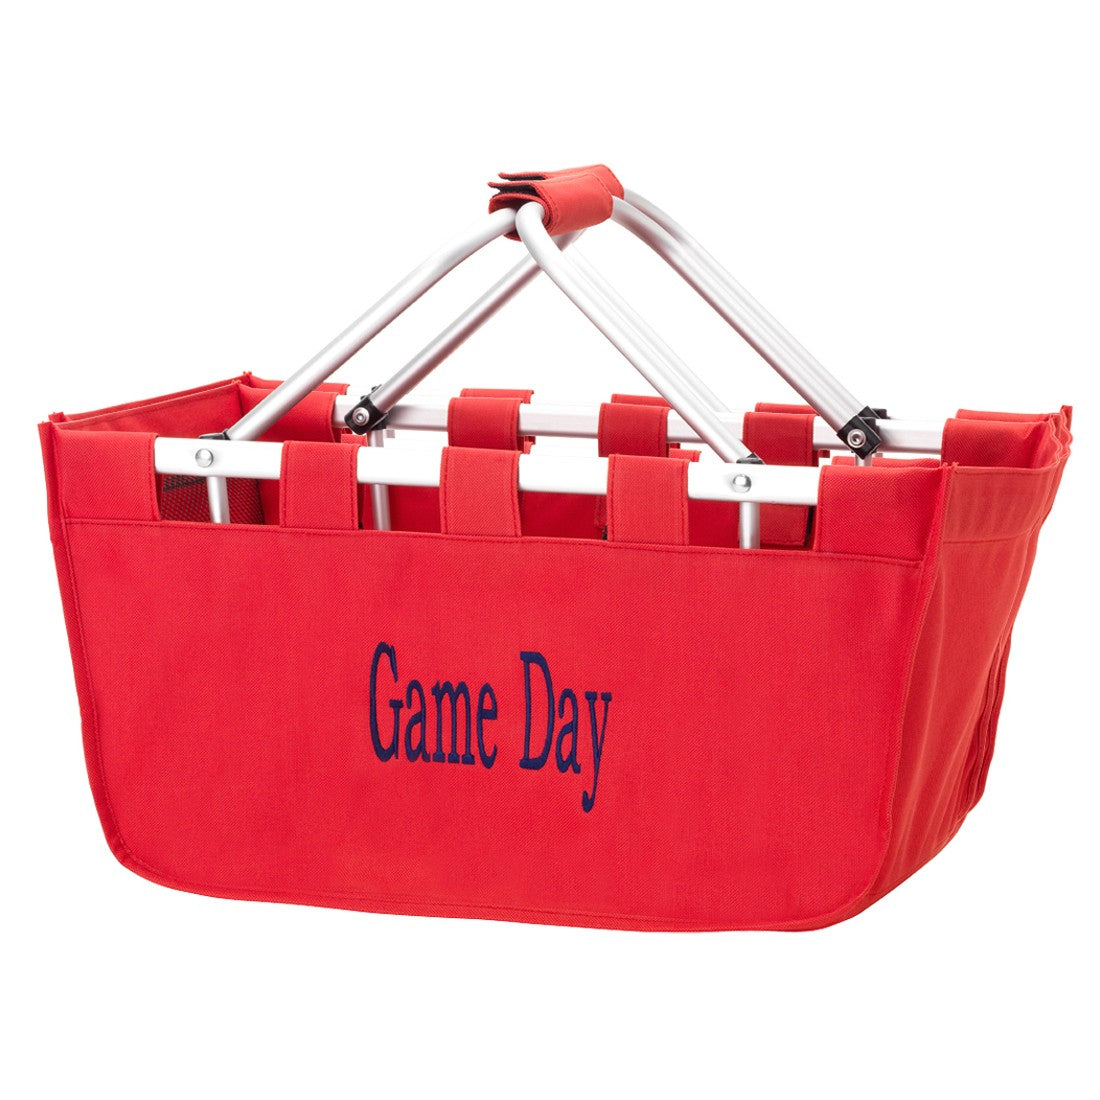 Red Market Tote - A Tailgating Must Have!